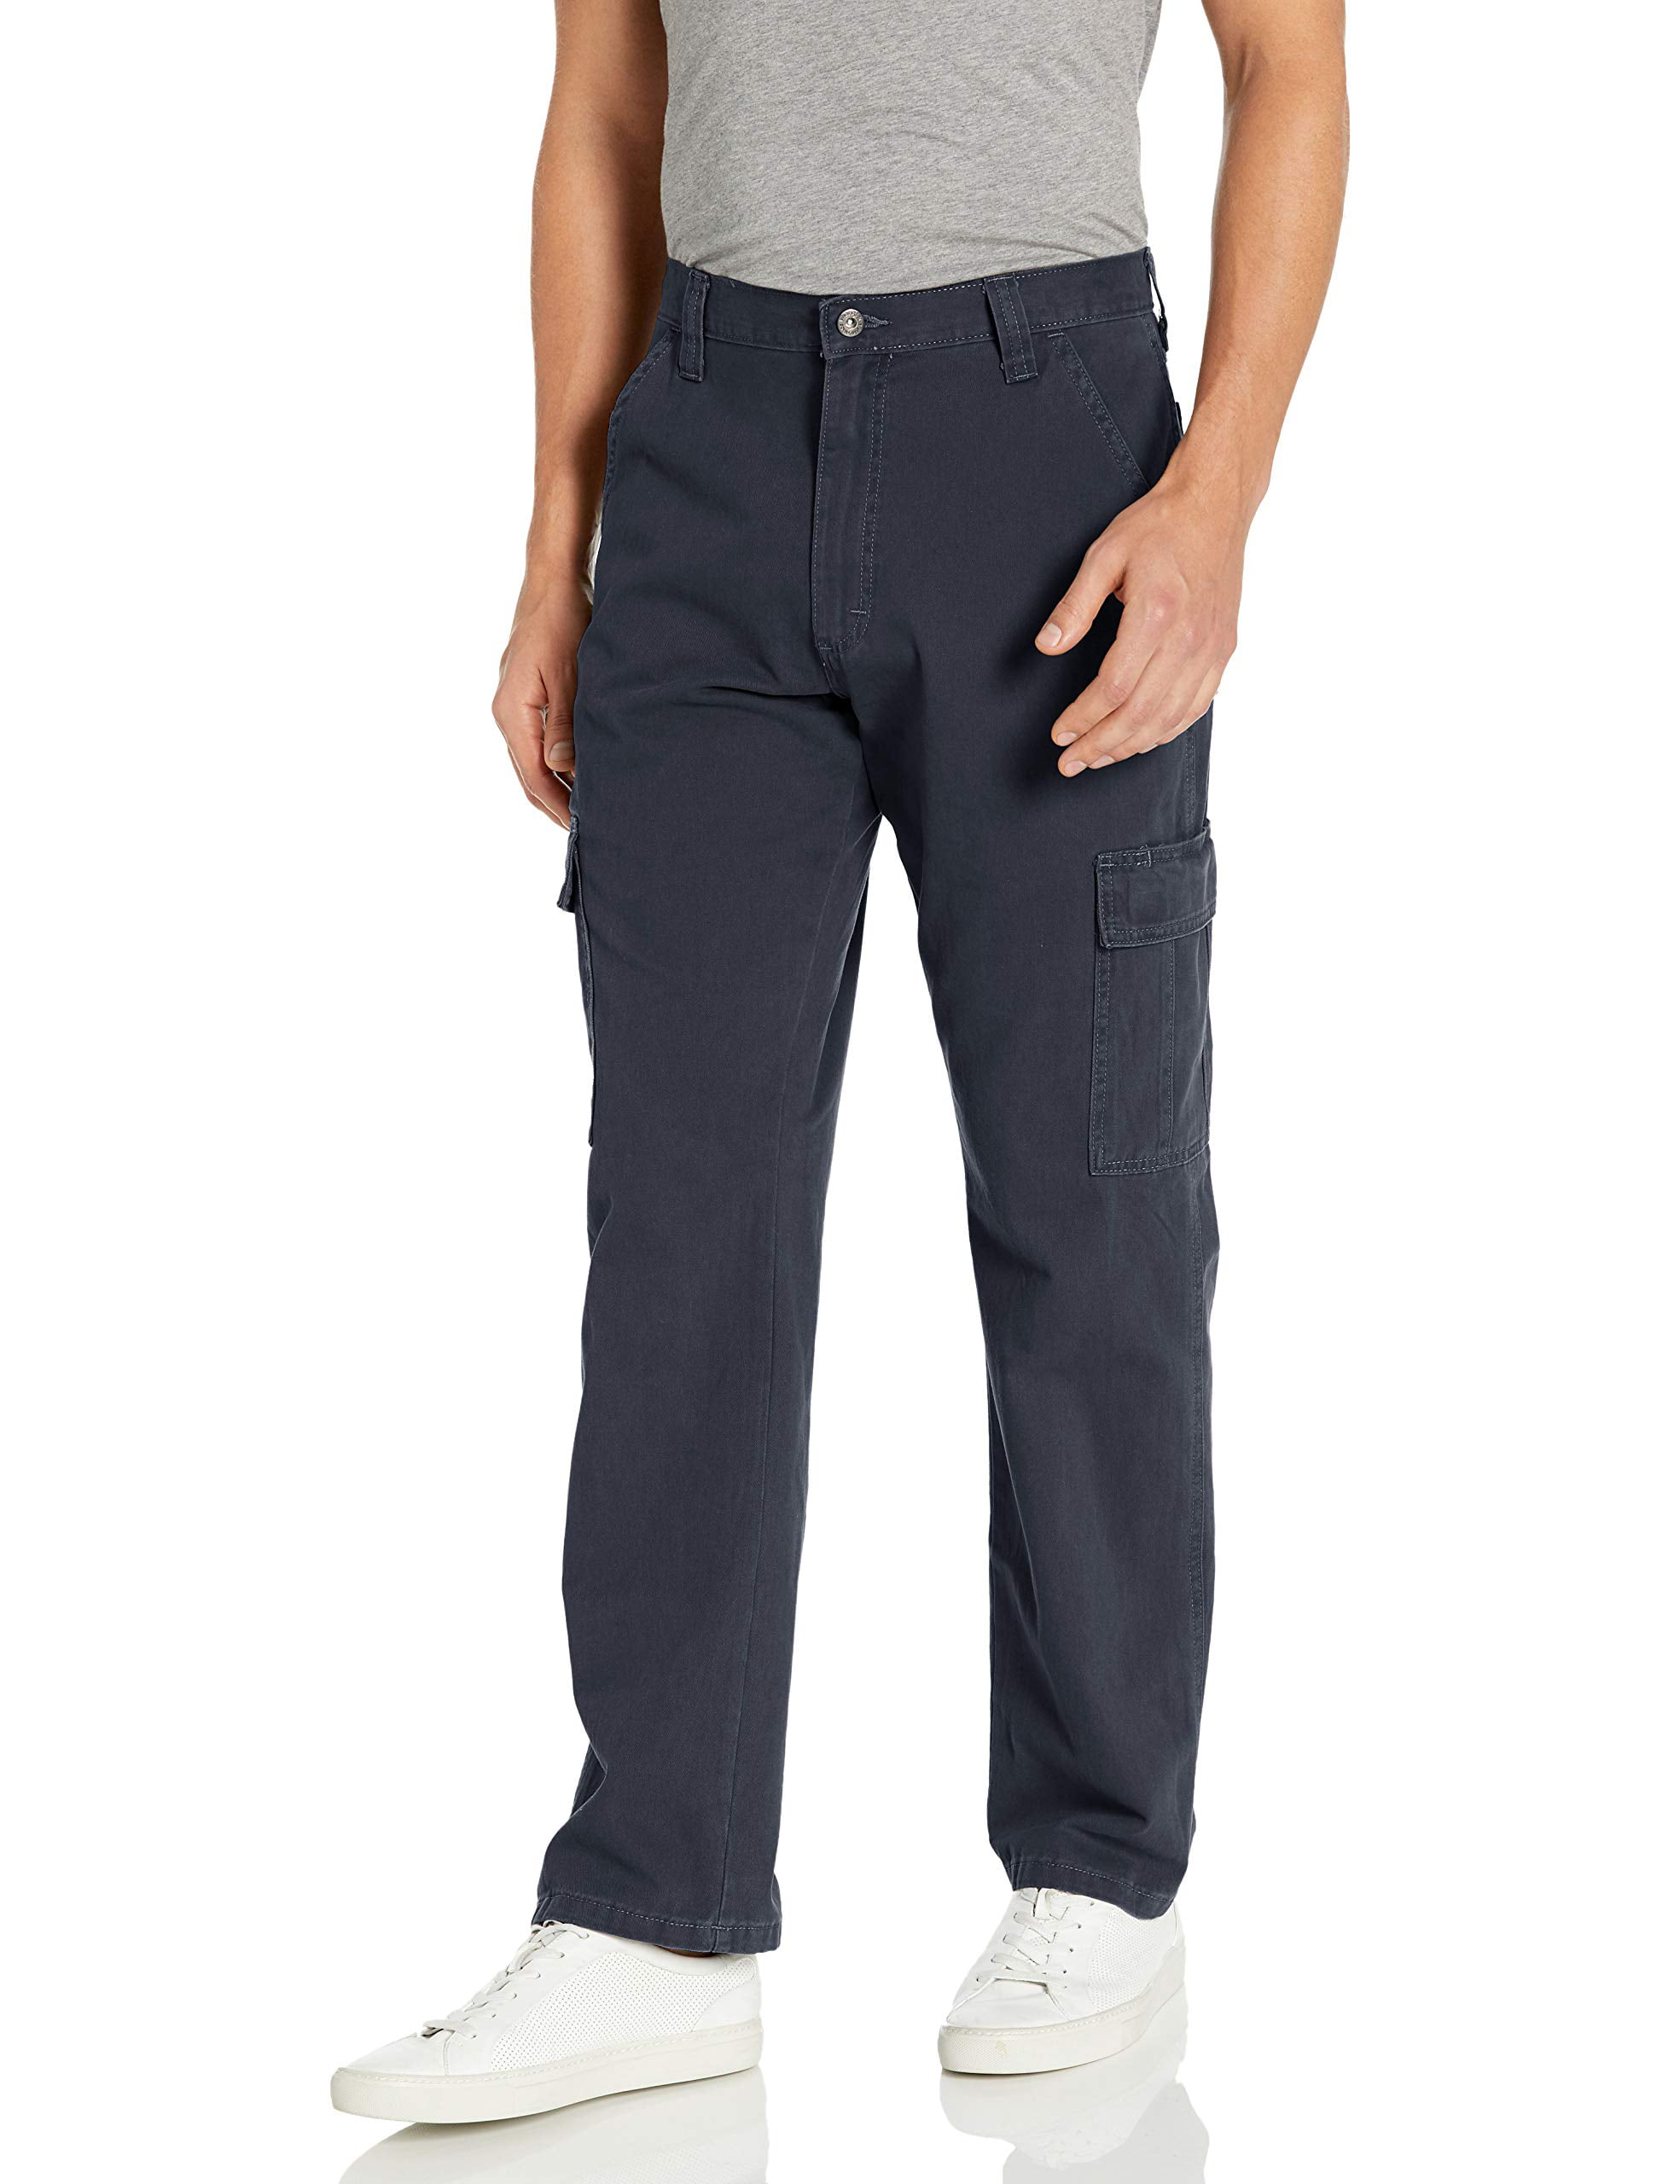 Wrangler - Mens Pants Navy 32x32 Twill Relaxed Fit Cargo 32 - Walmart ...